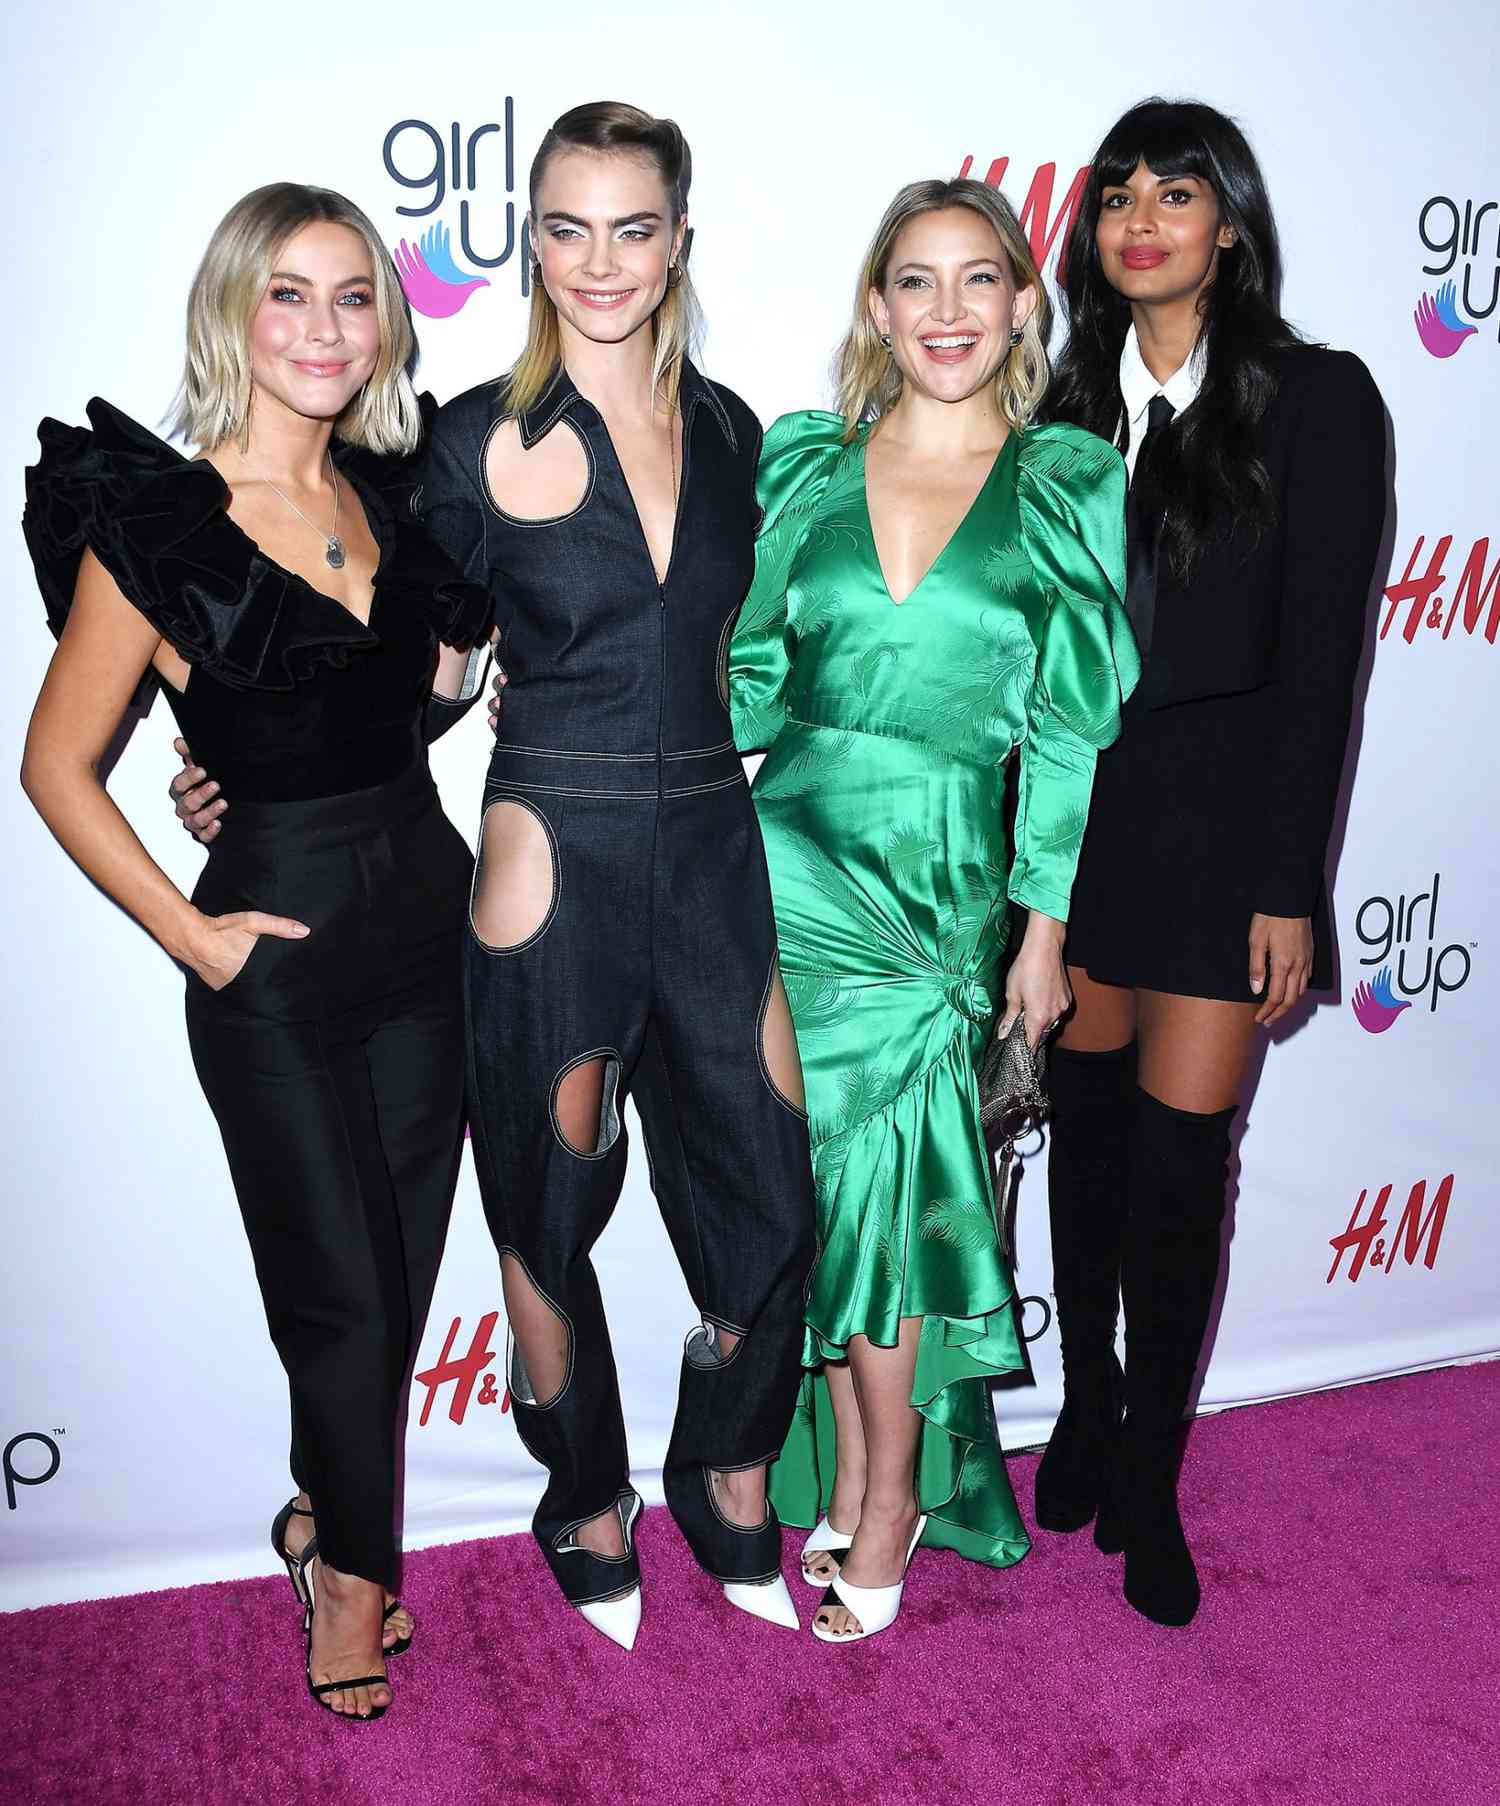 <p>Julianne Hough, Cara Delevingne, Kate Hudson and Jameela Jamil arrive at the 2nd Annual Girl Up #GirlHero Awards at the Beverly Wilshire Four Seasons Hotel on Sunday.</p>
                            